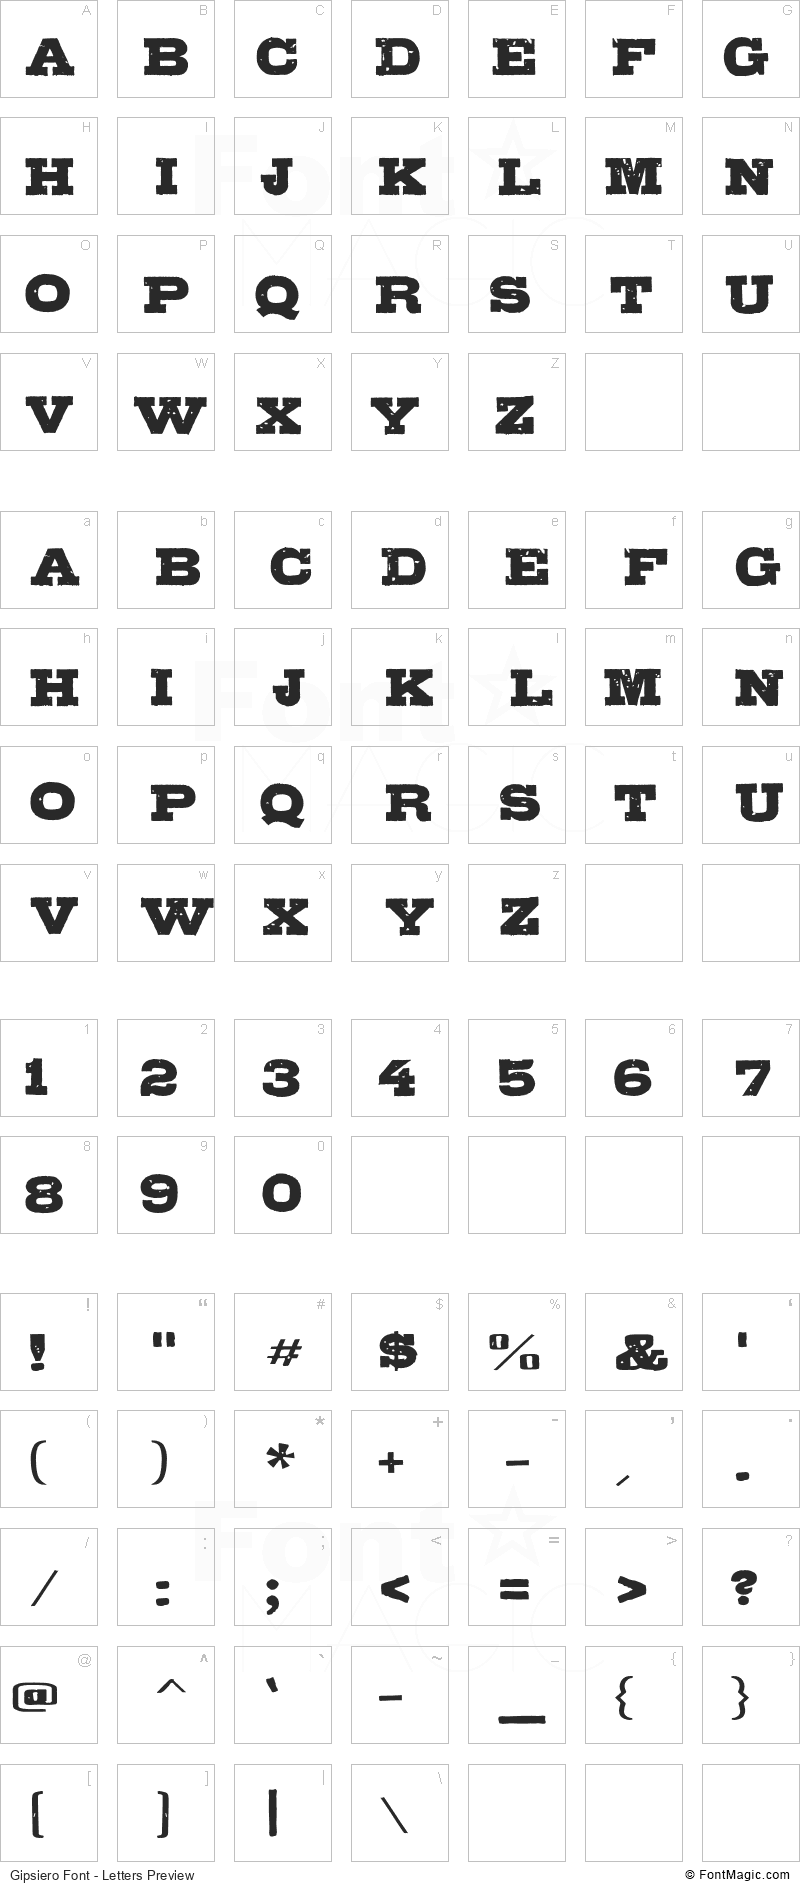 Gipsiero Font - All Latters Preview Chart